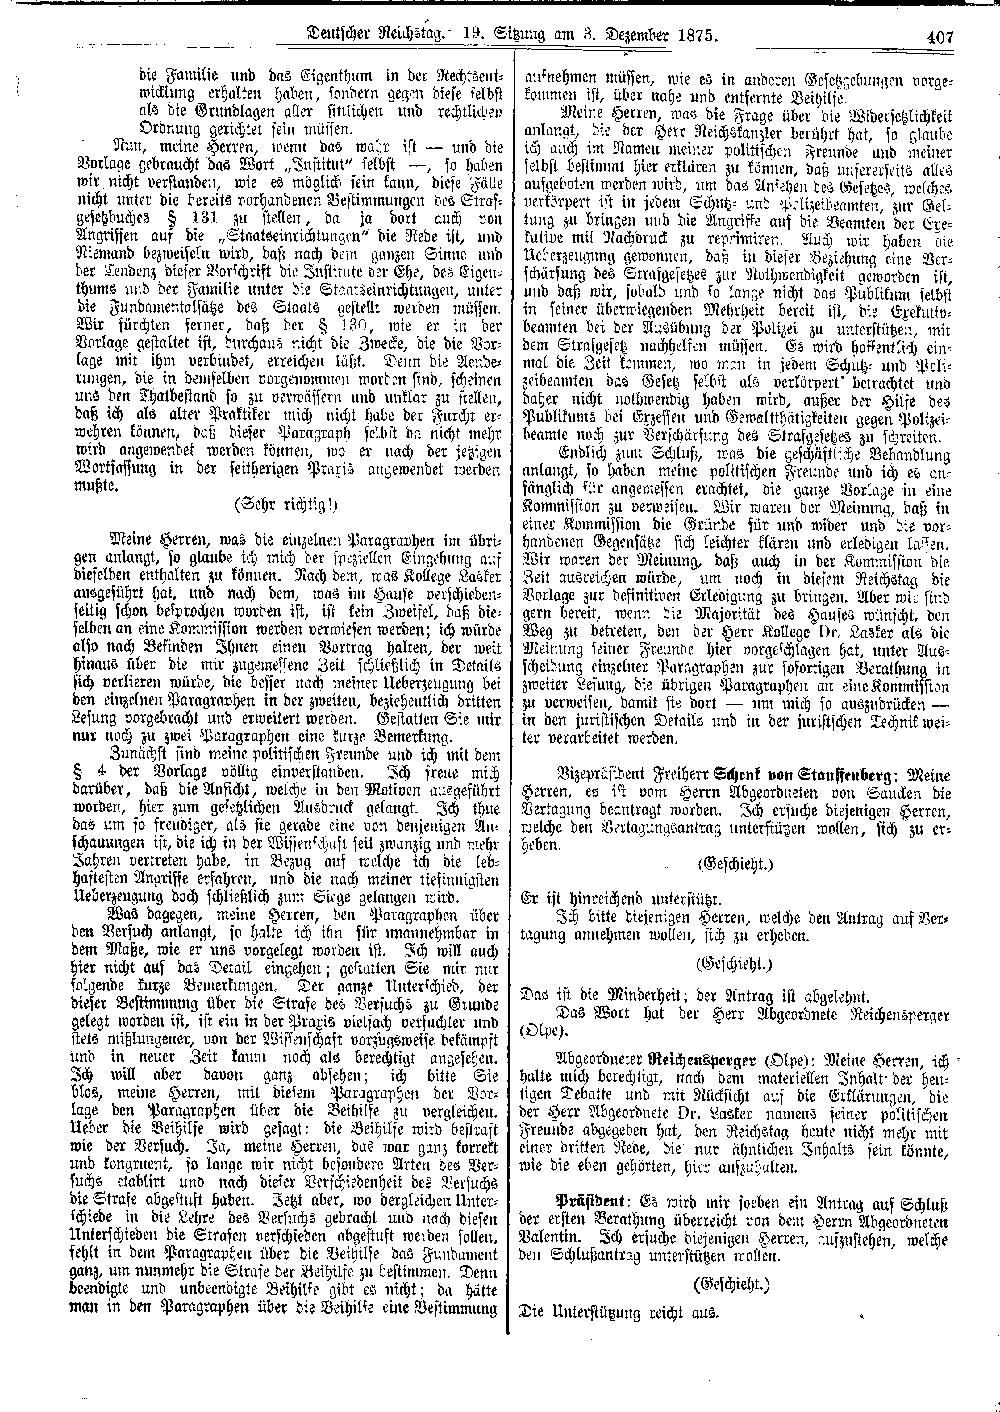 Scan of page 407